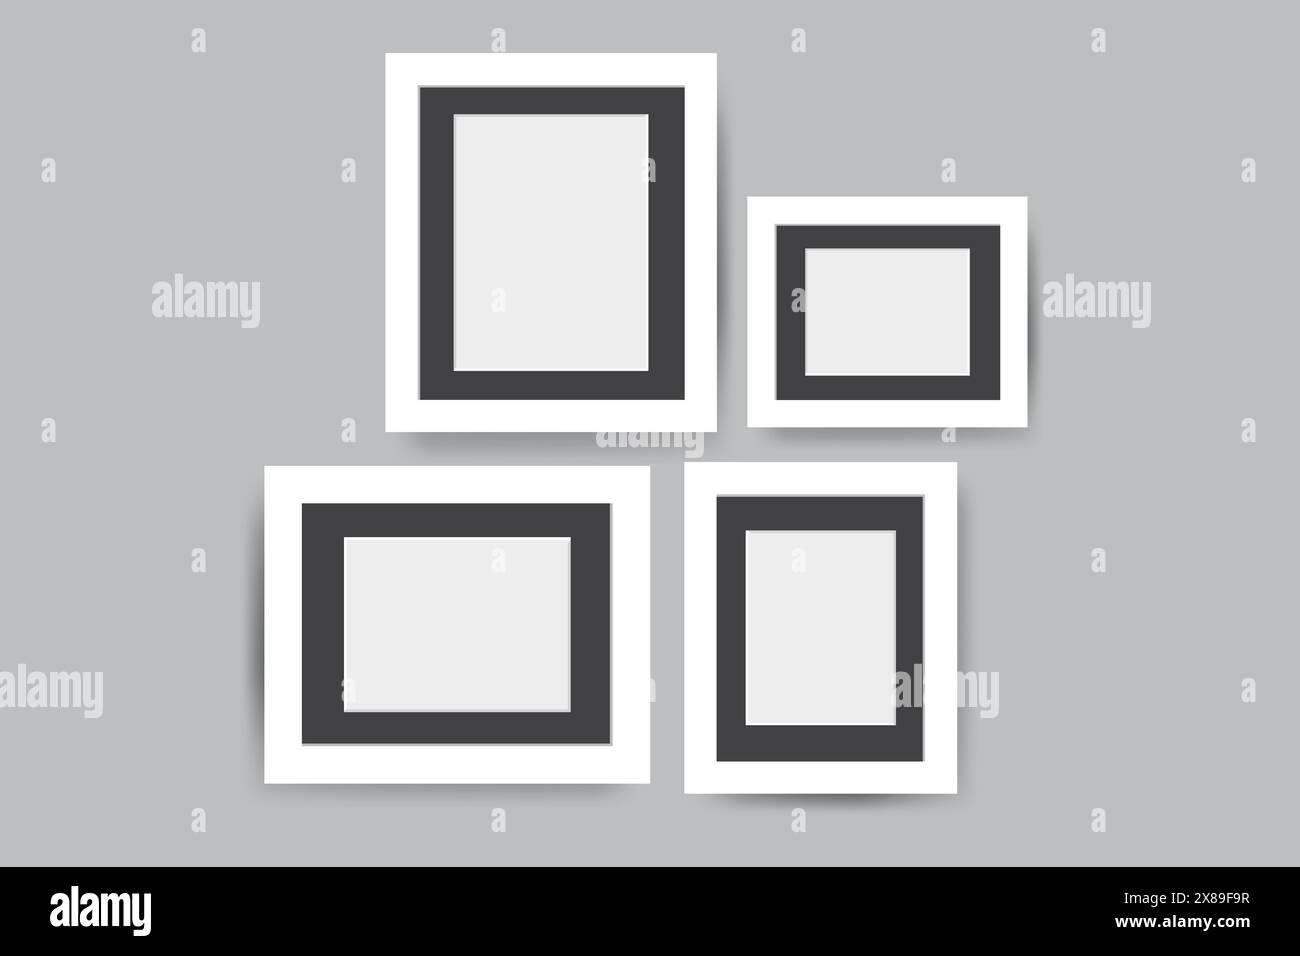 Templates photo collage image frames for photo or Picture Stock Vector